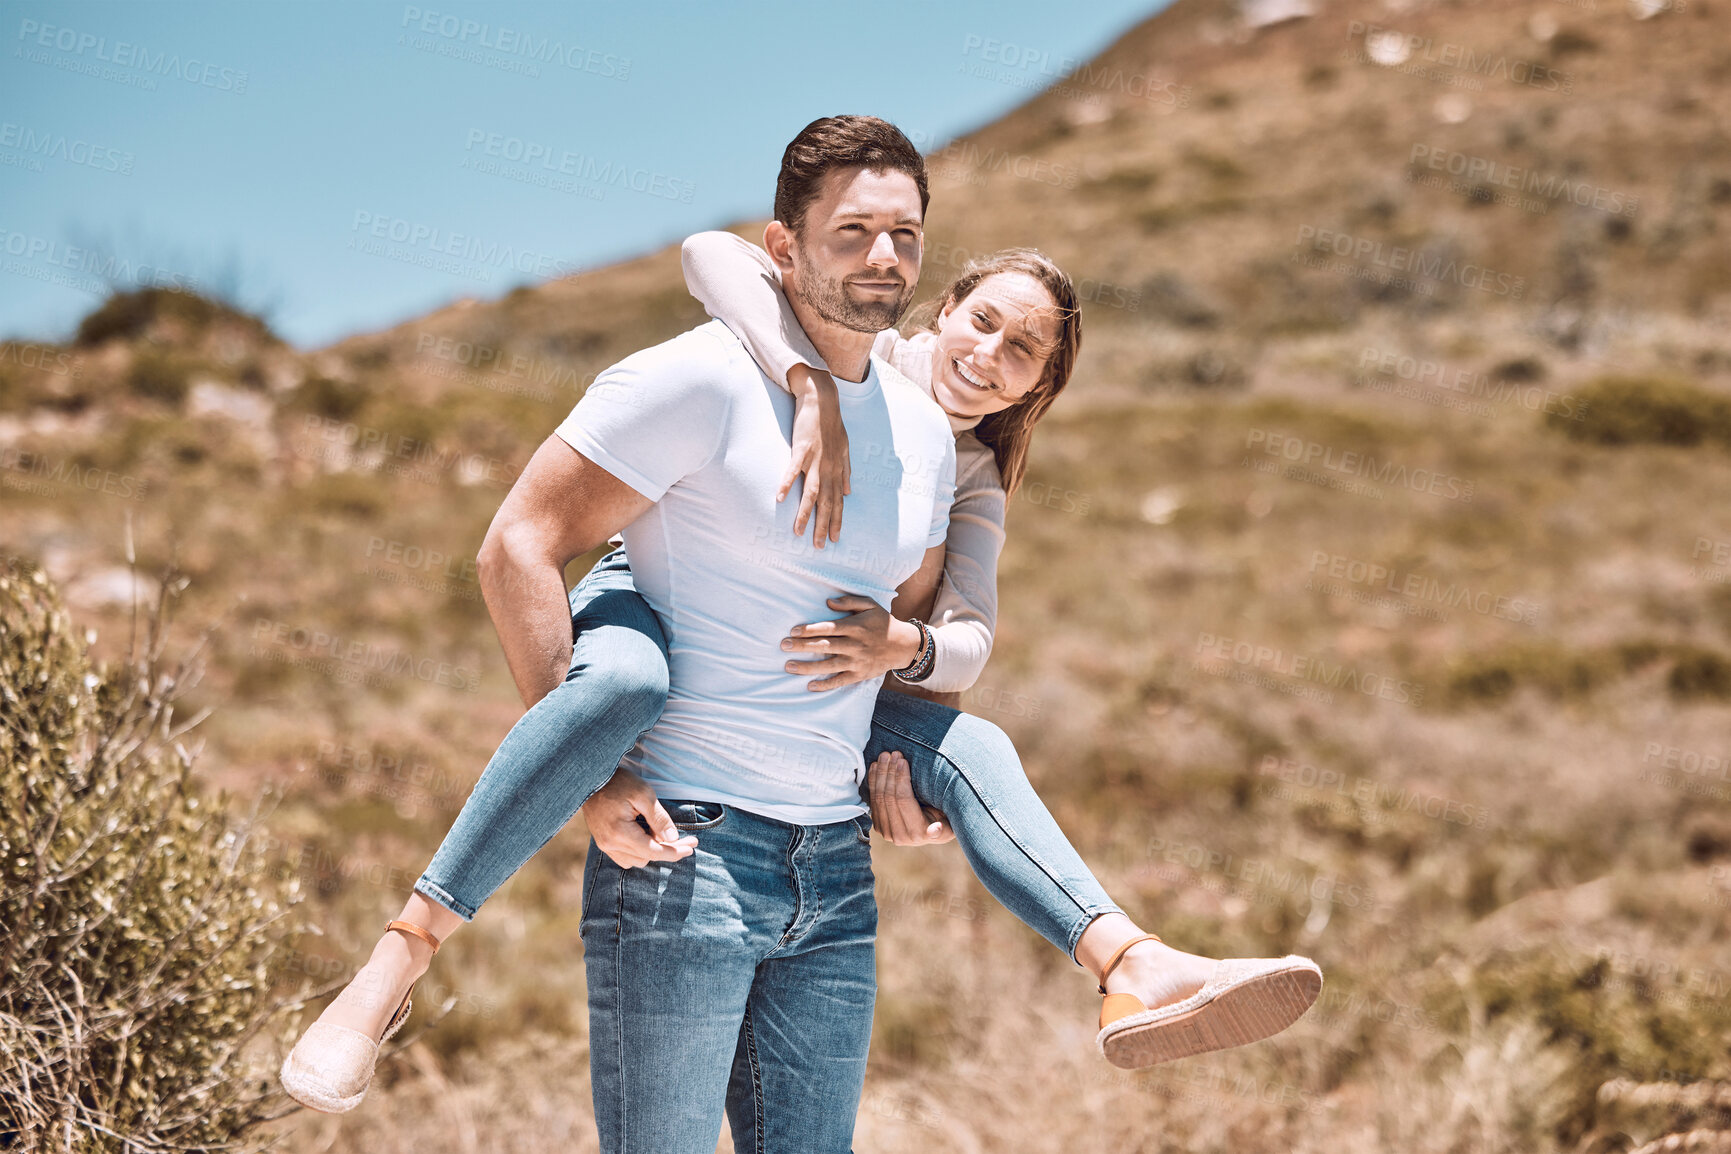 Buy stock photo Happy and in love couple having fun in nature and enjoying quality time together. Cute and relax boyfriend piggyback or carrying girlfriend with a smile on a bonding and romantic countryside date 